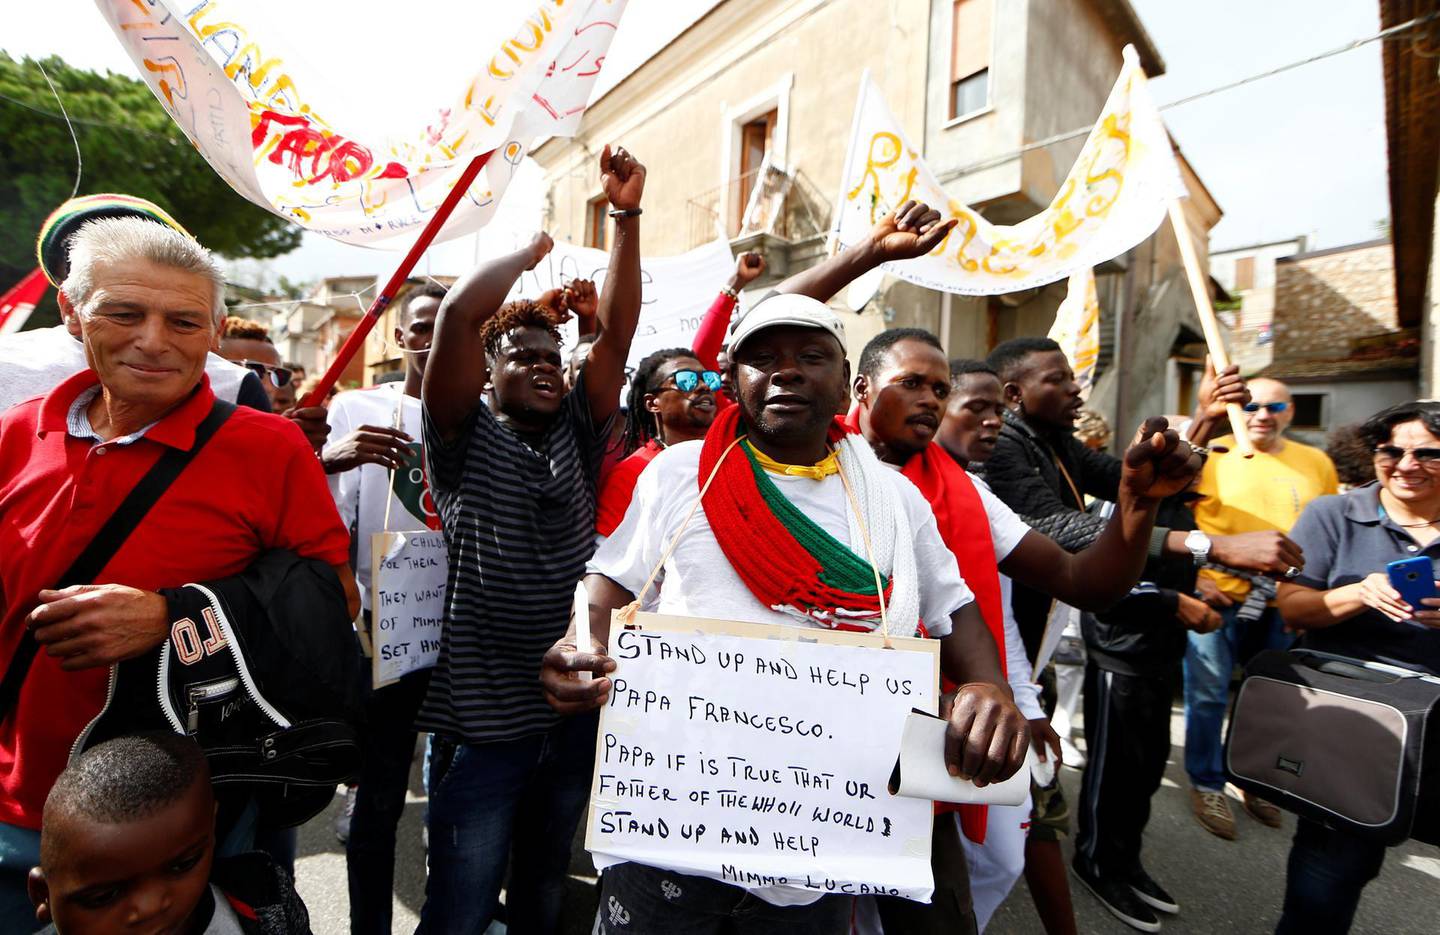 Migrants demonstrate in support of the mayor of the town Domenico Lucano in front of his house in the southern Italian town of Riace, October 6, 2018. REUTERS/Yara Nardi